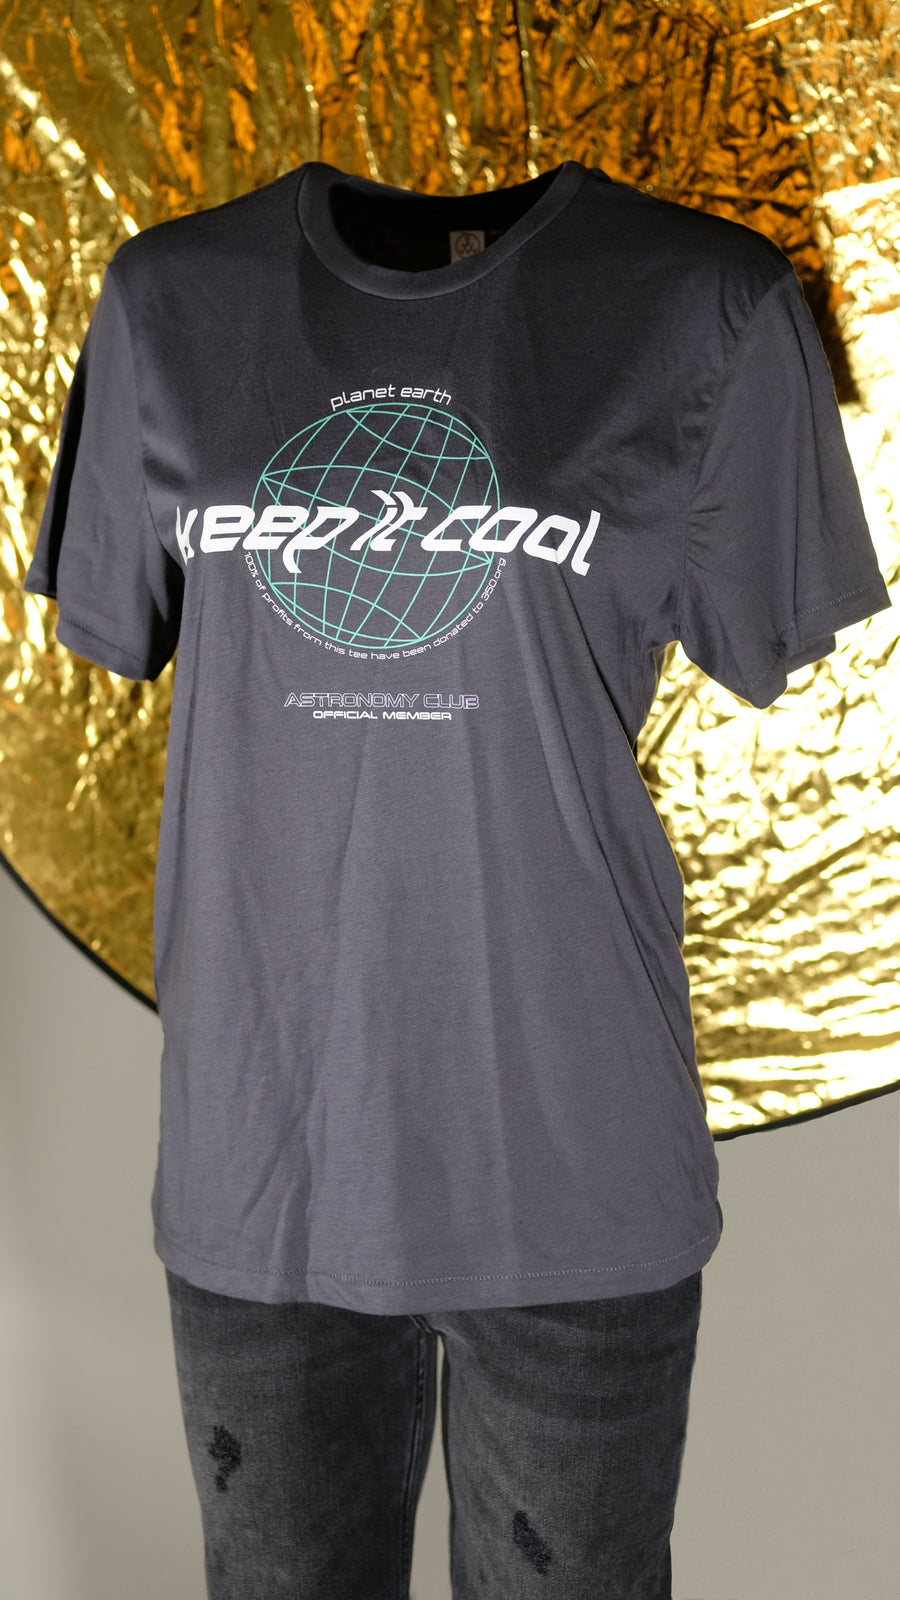 Astronomy Club Keep It Cool Organic Cotton Tee For 350.Org